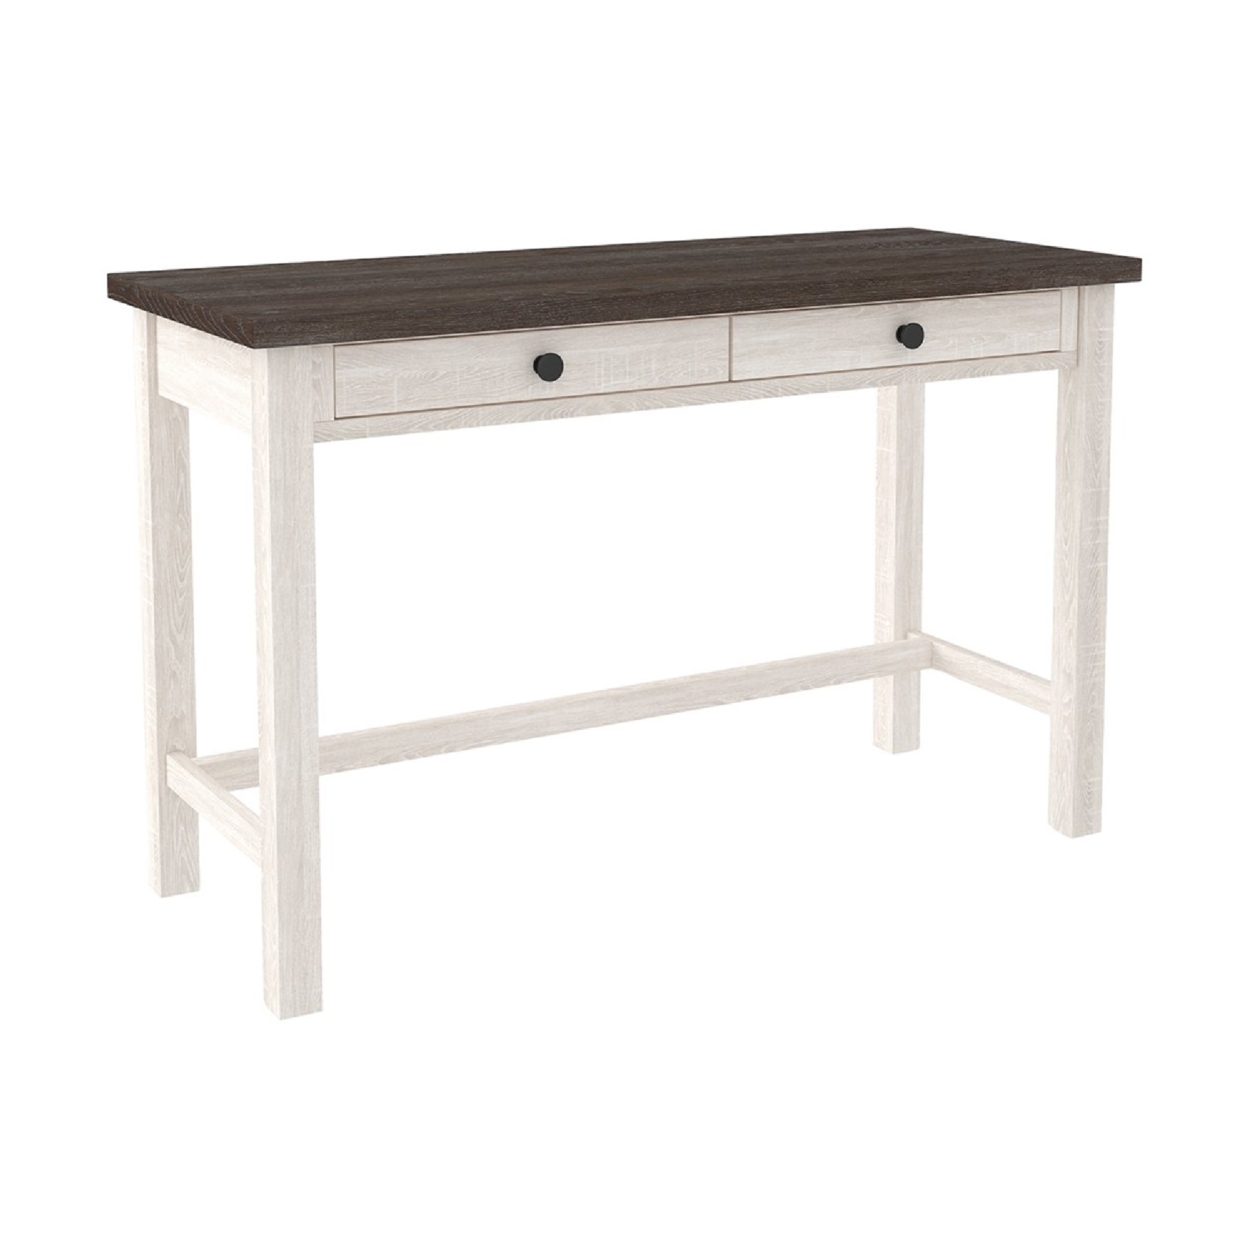 Wooden Writing Desk With Block Legs And 2 Storage Drawers, Gray And White- Saltoro Sherpi